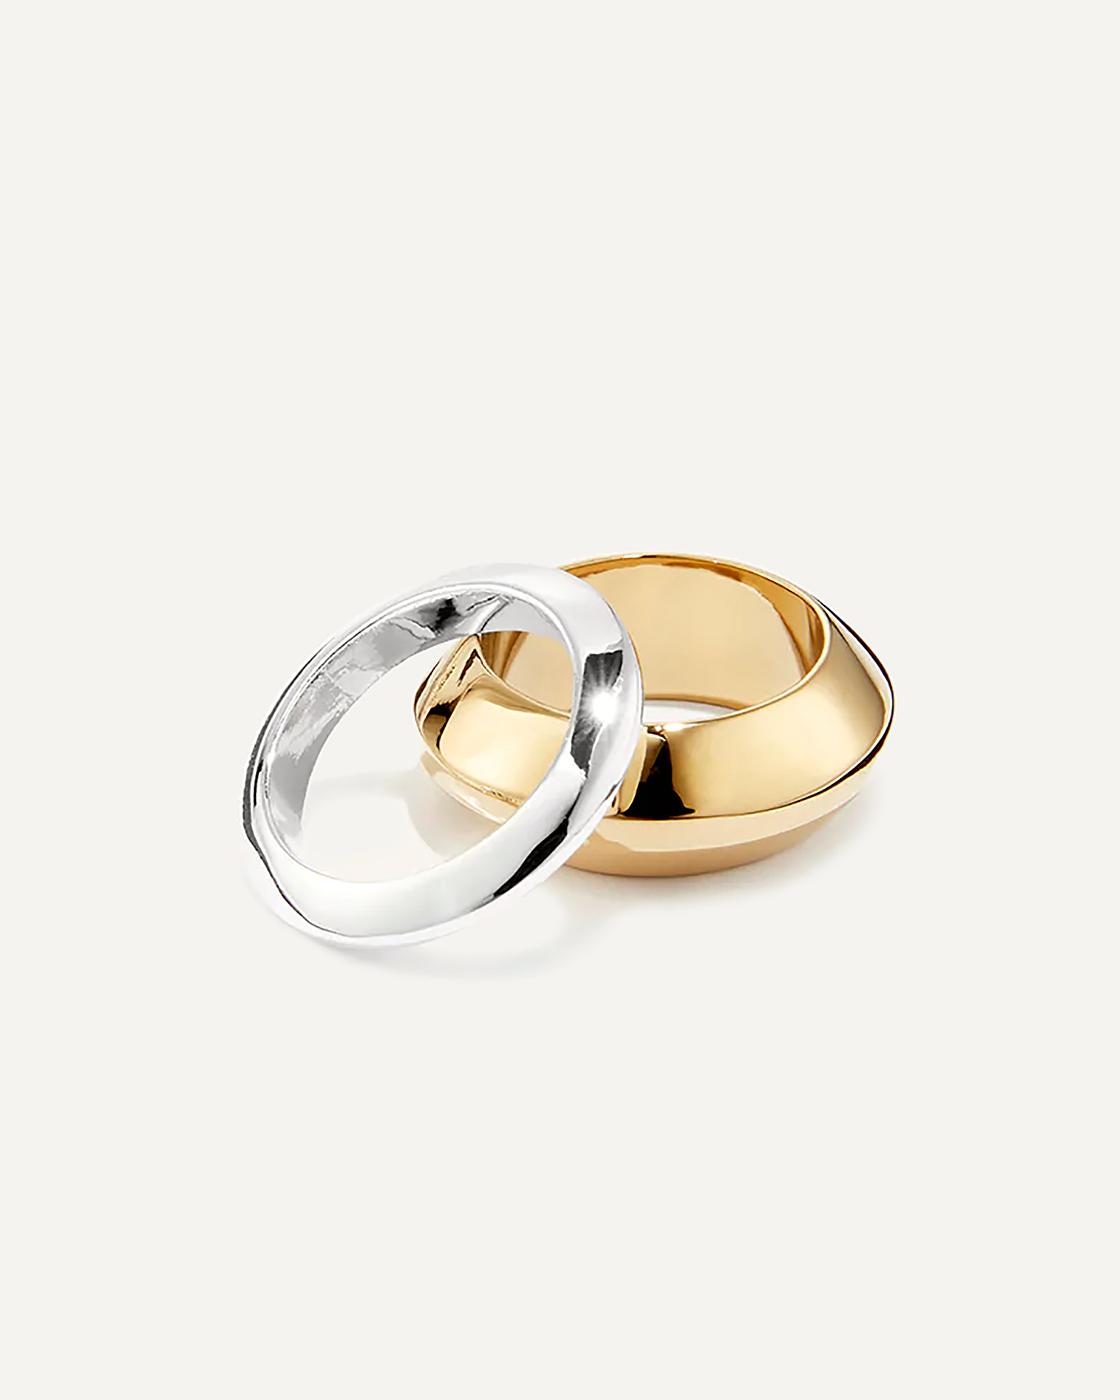 Toni Gold-Plated and Silver-Plated Ring Set